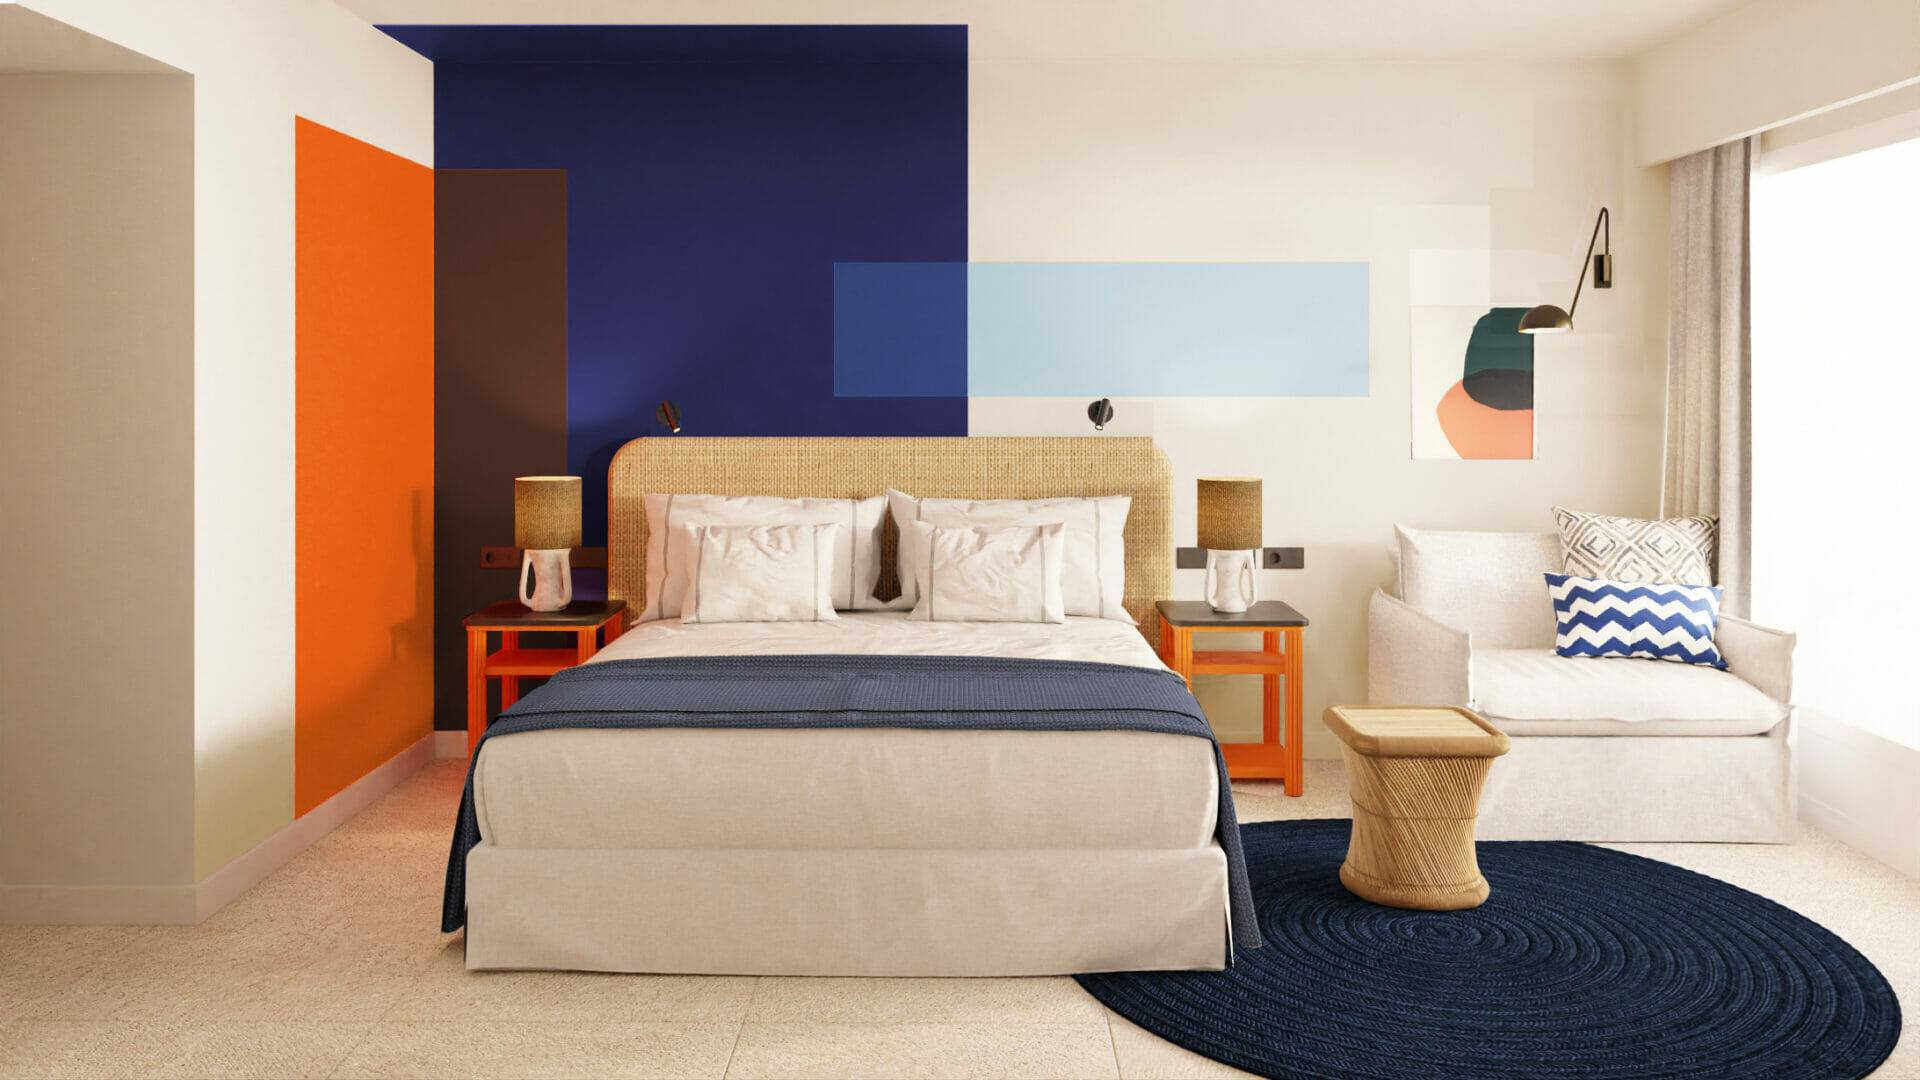 ROOM MATE GROUP UNVEILS ITS NEW BRAND: ROOM MATE BEACH HOTELS